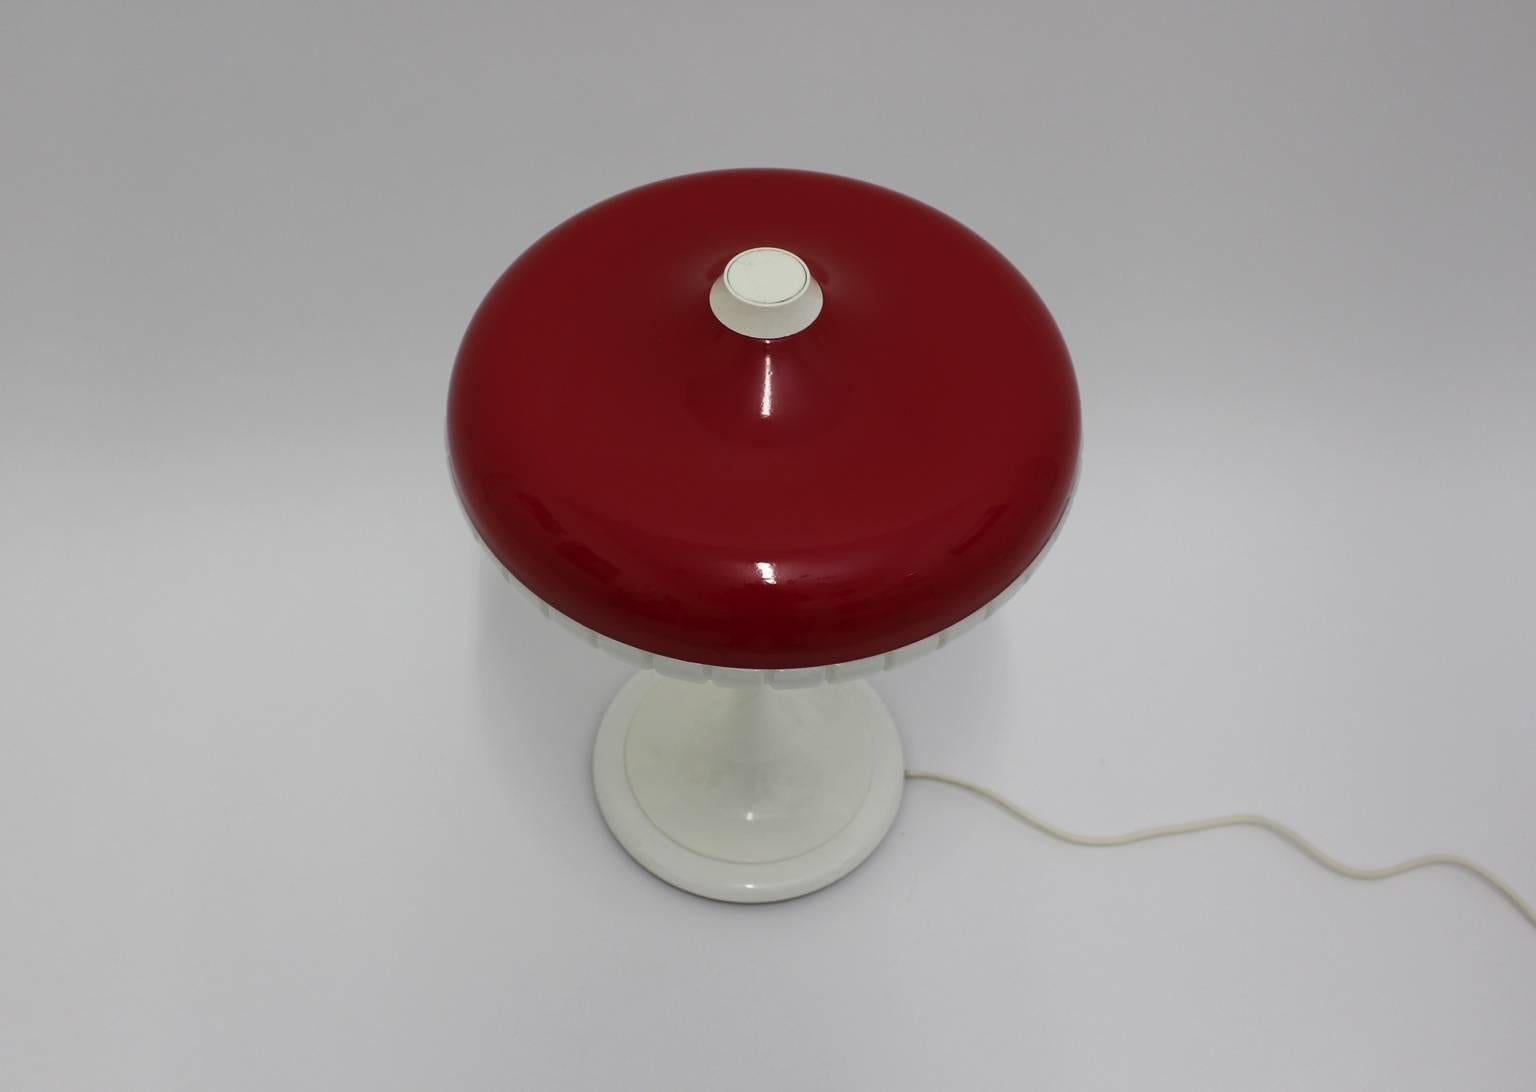 Lacquered Space Age Red Vintage Mushroom Table Lamp Siform by Siemens Germany, 1960s For Sale